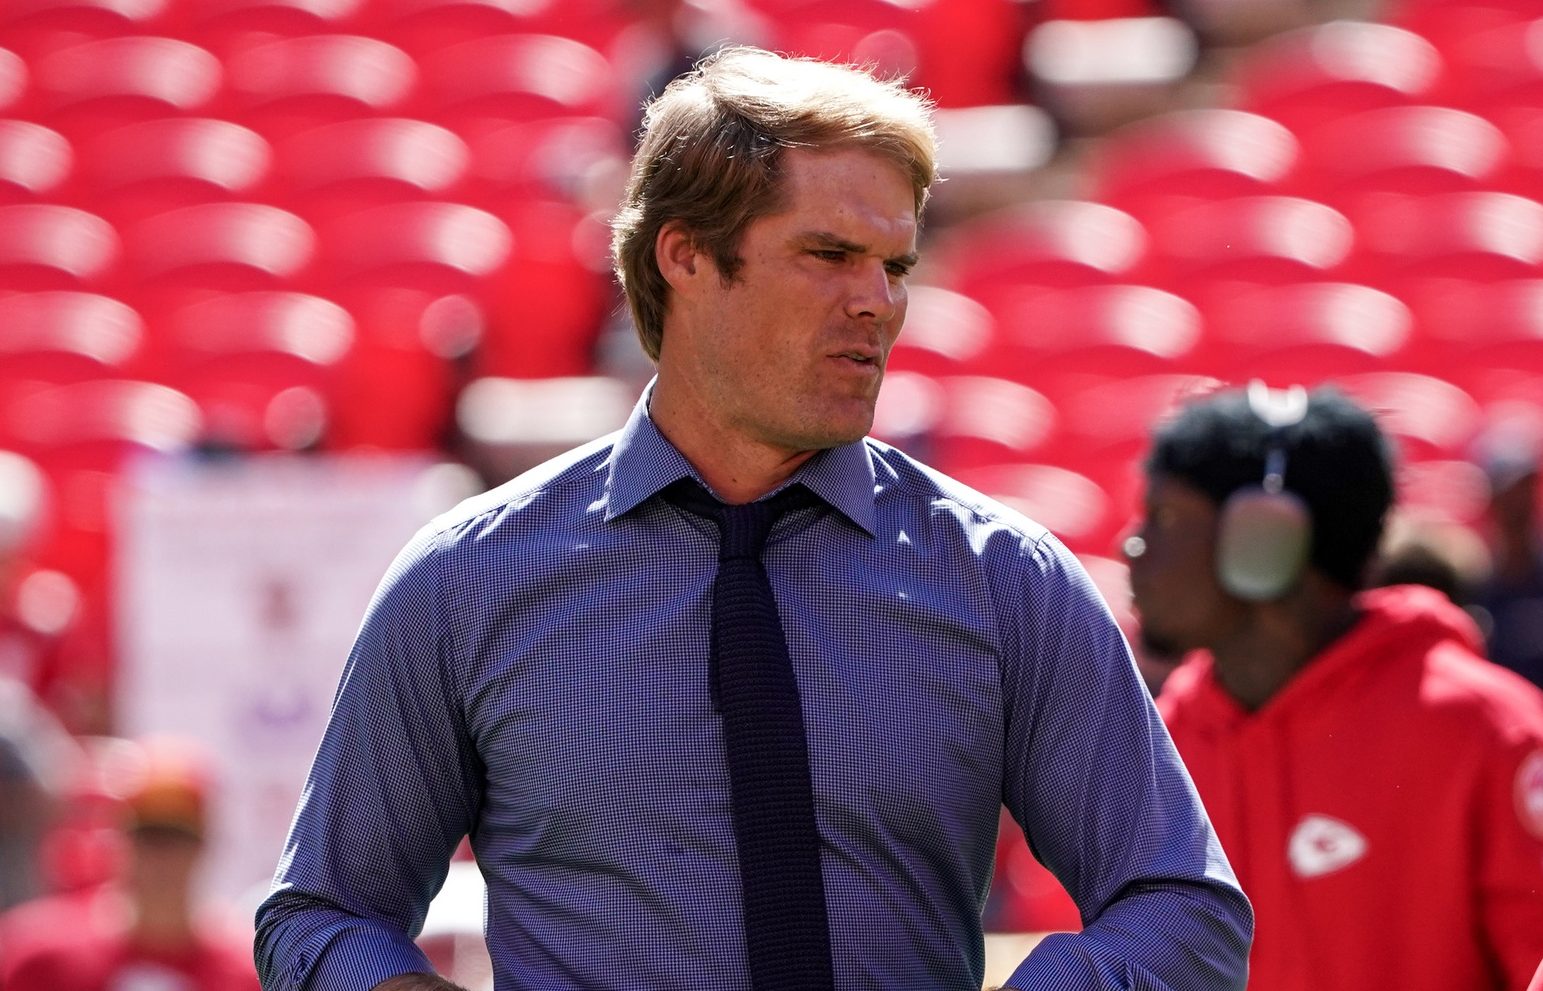 Sports broadcaster Greg Olsen on field against the Chicago Bears prior to a game at GEHA Field at Arrowhead Stadium. Mandatory Credit: Denny Medley-USA TODAY Sports